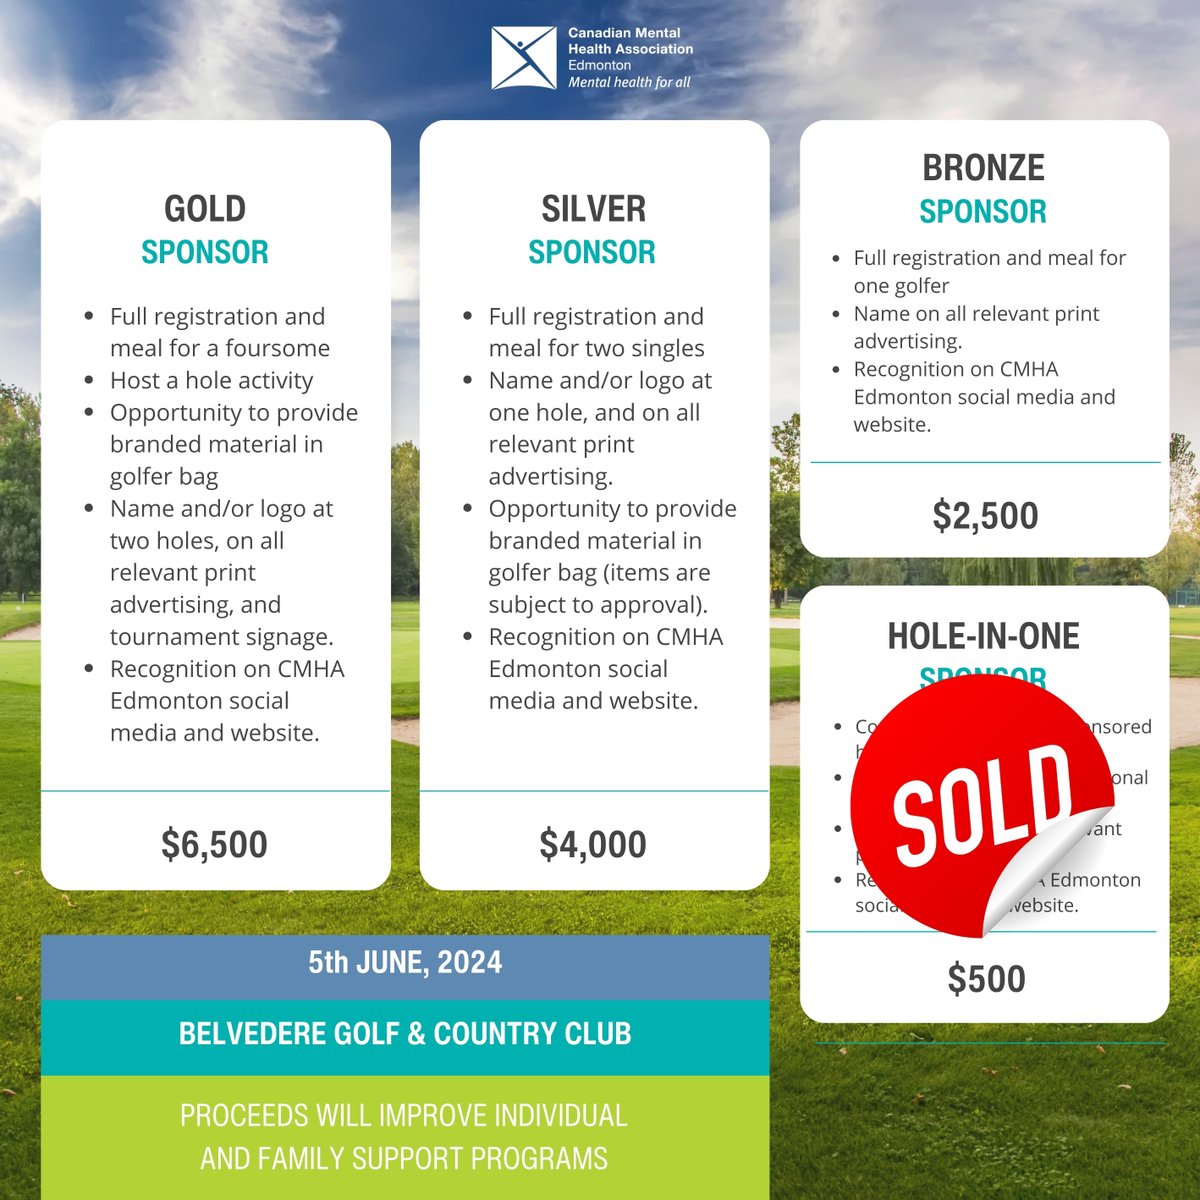 Looking for a new way to support Mental Health Services in Edmonton, AND get you business exposure to new demographics and audiences?! We've got you covered! DM us or email to secure one of our sponsorship level opportunities! #yeggolftournaments #cmhaedmonton